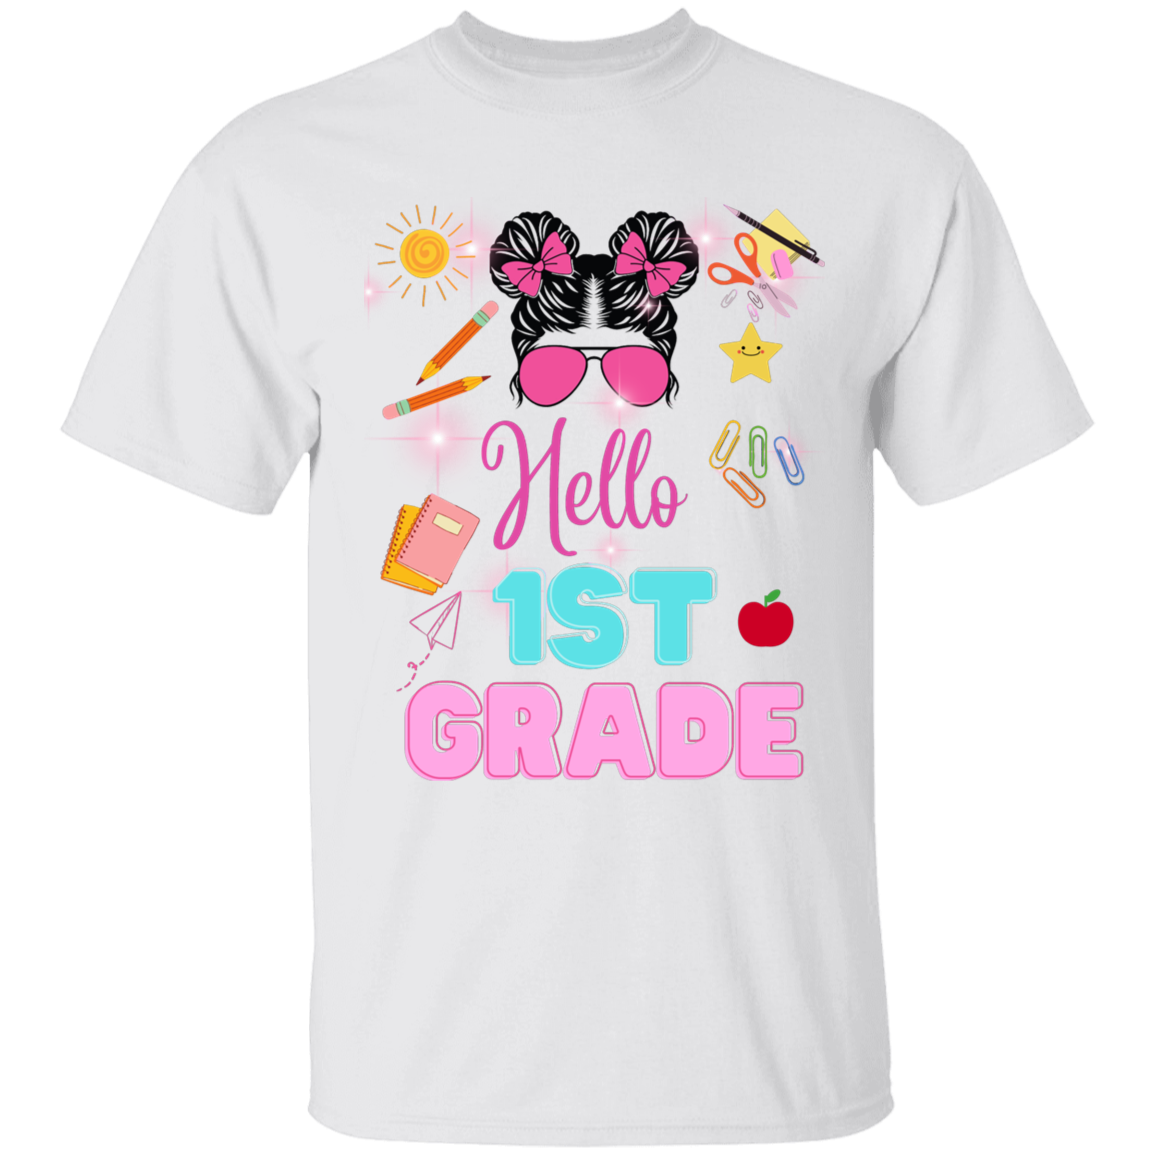 Youth First Grade t-shirt,Back to school  tee for kids  100% Cotton